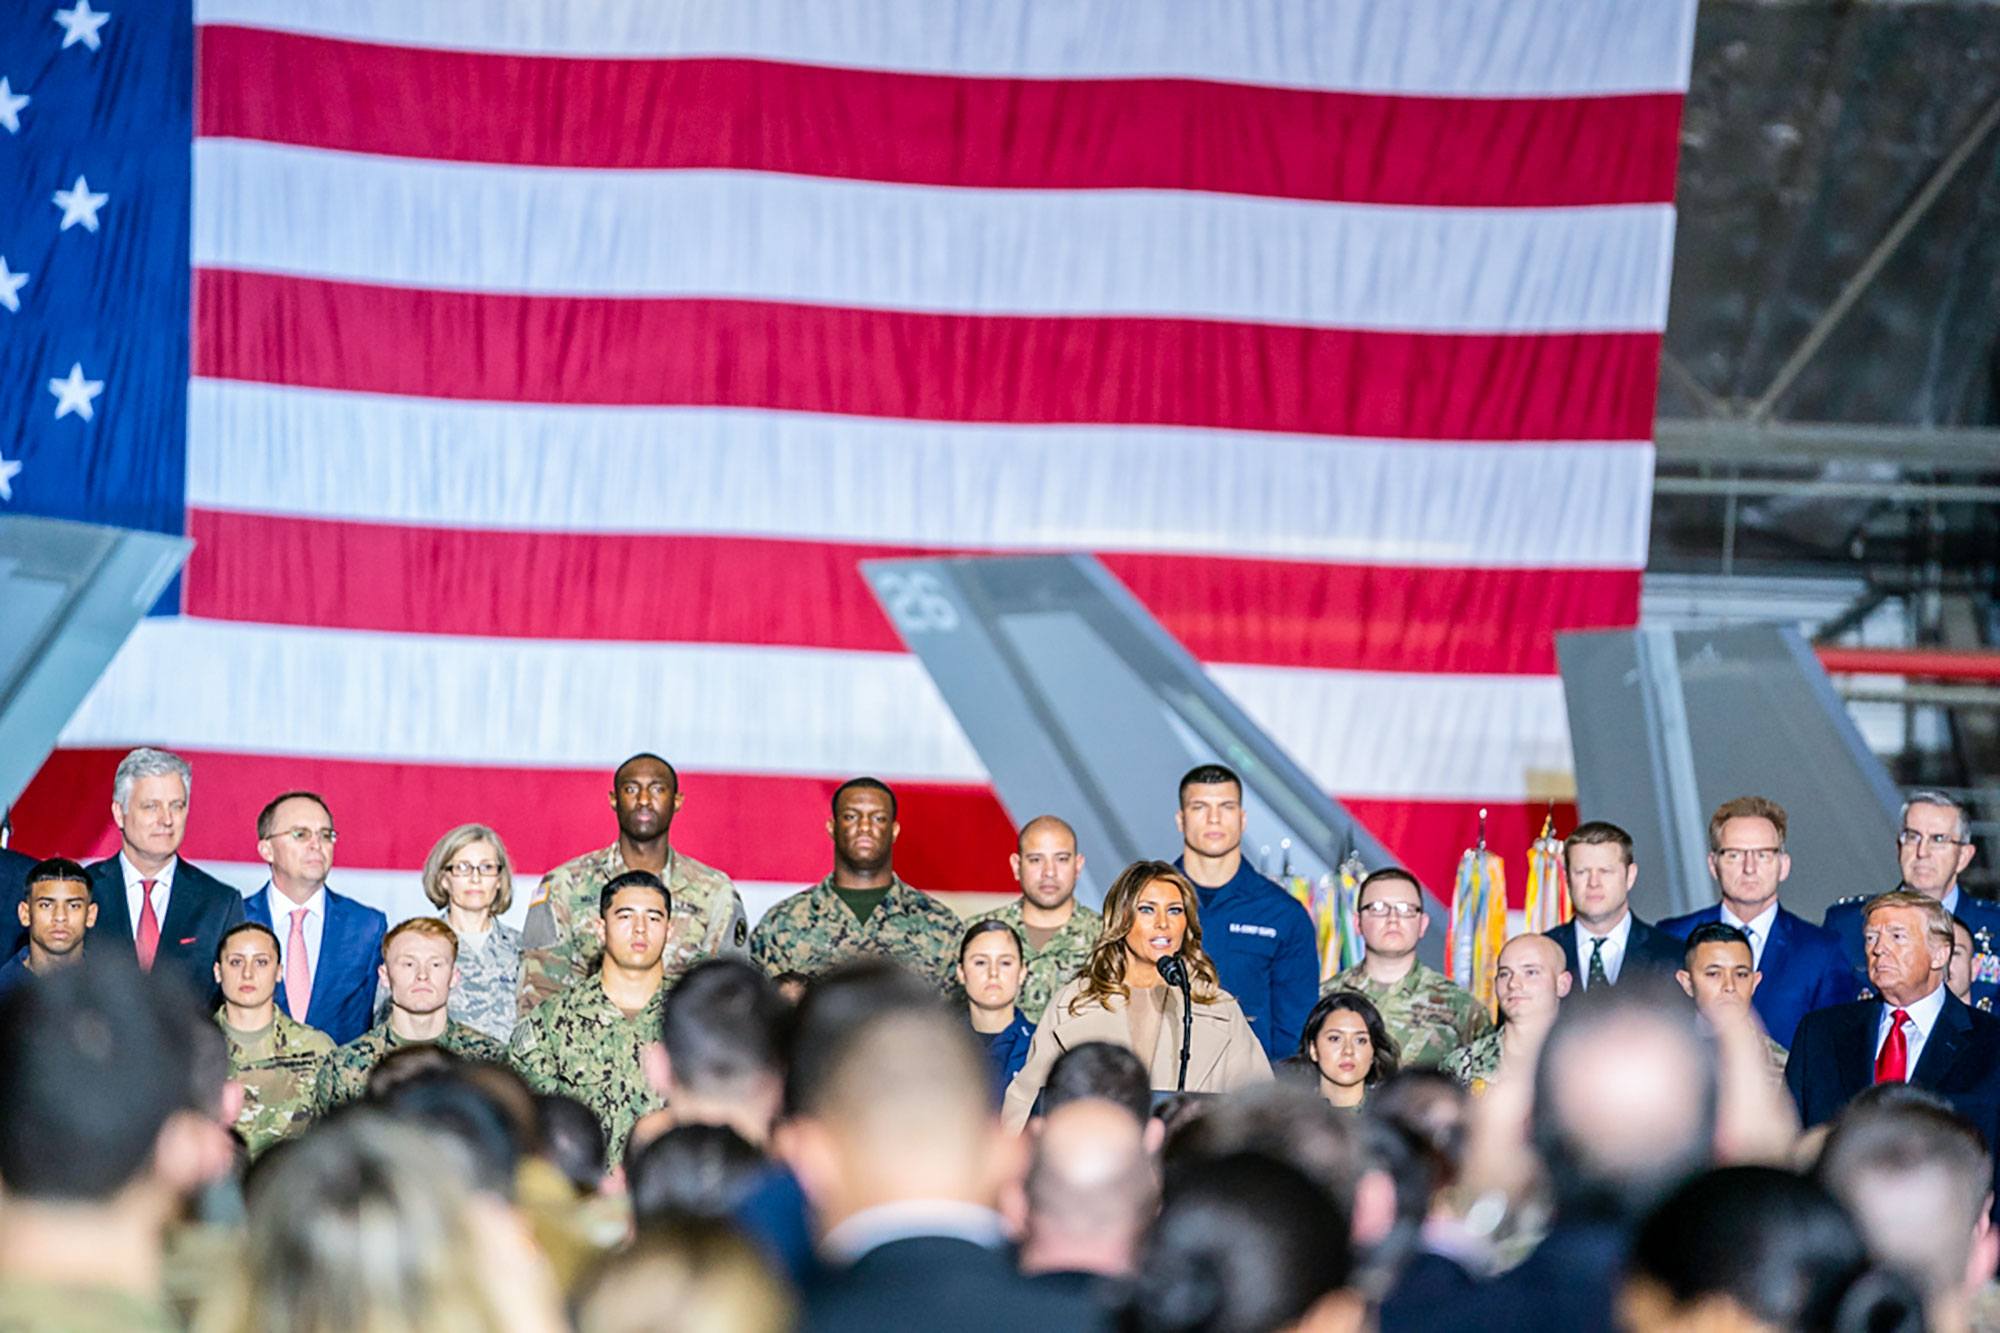 First Lady Melania Trump delivers remarks prior to President Donald J. Trump signing S. 1790, The National Defense Authorization Act for Fiscal Year 2020 Friday, Dec. 20, 2019, at Hangar 6 at Joint Base Andrews, Md.